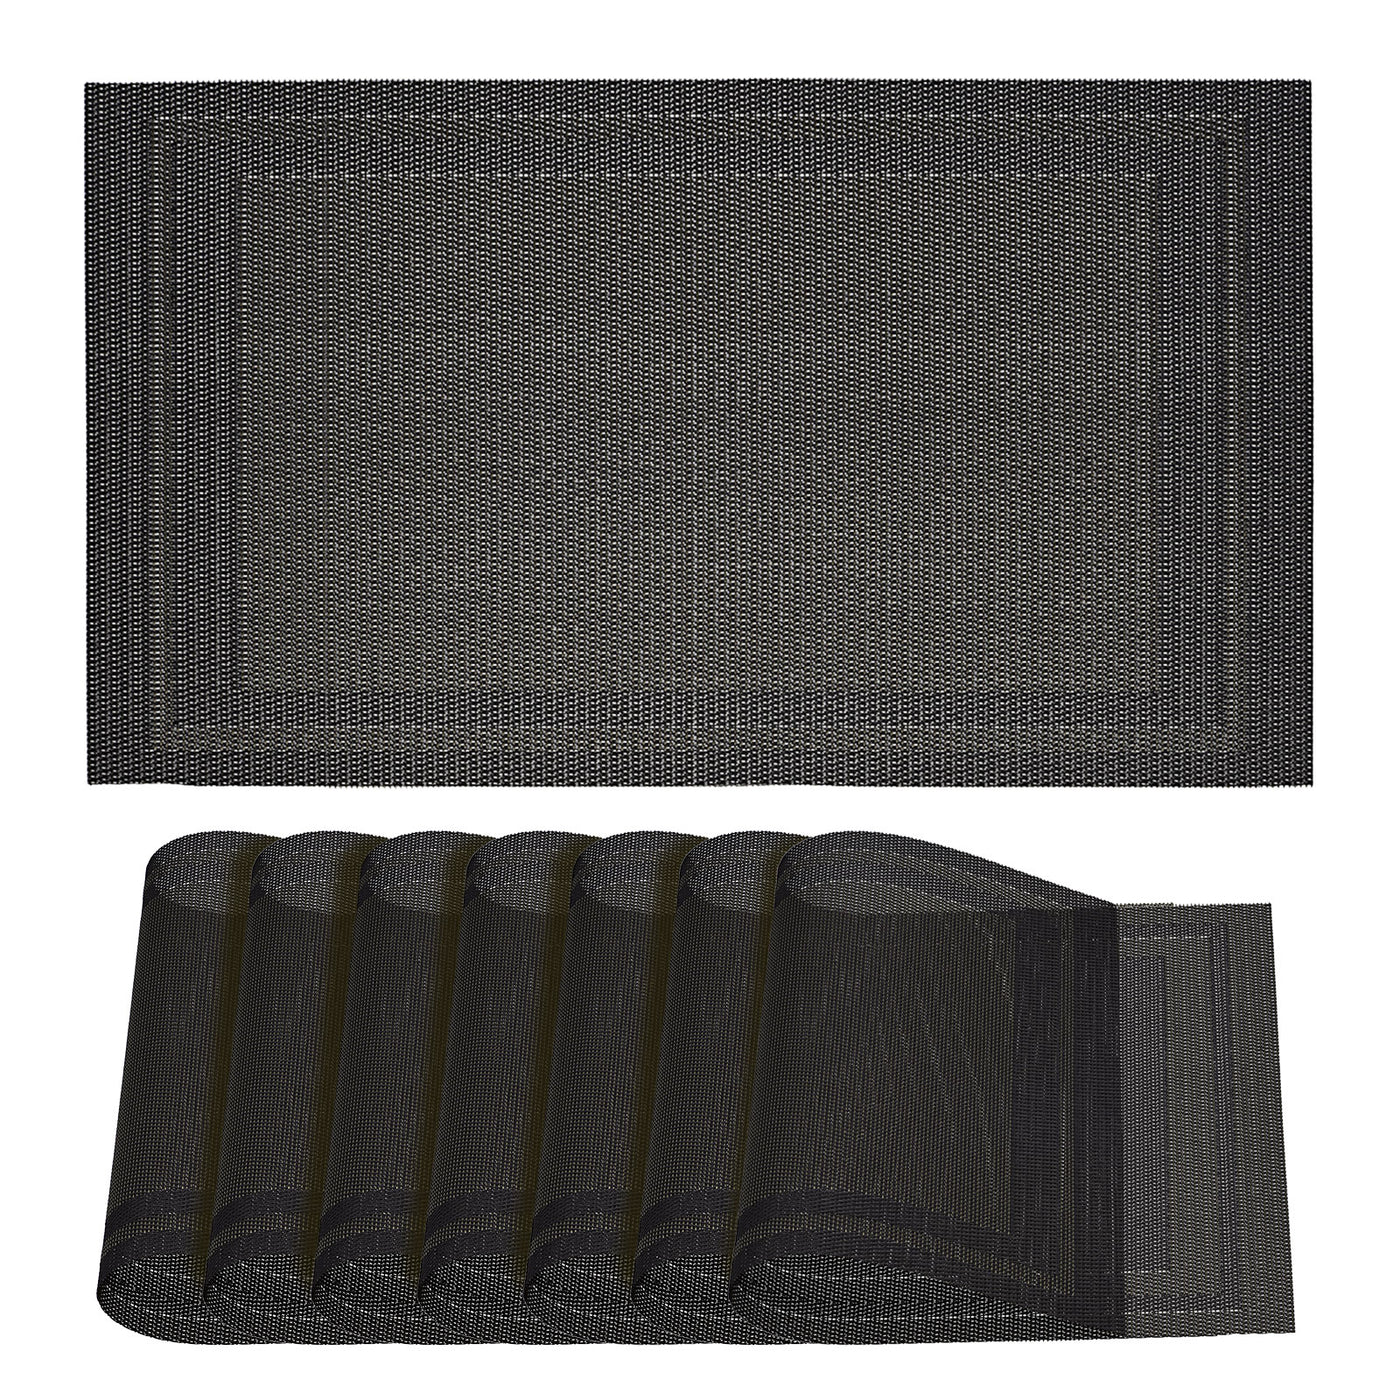 uxcell Uxcell Place Mats, 450x300mm Table Mats Set of 8 PVC Washable Woven Placemat Dark Gray